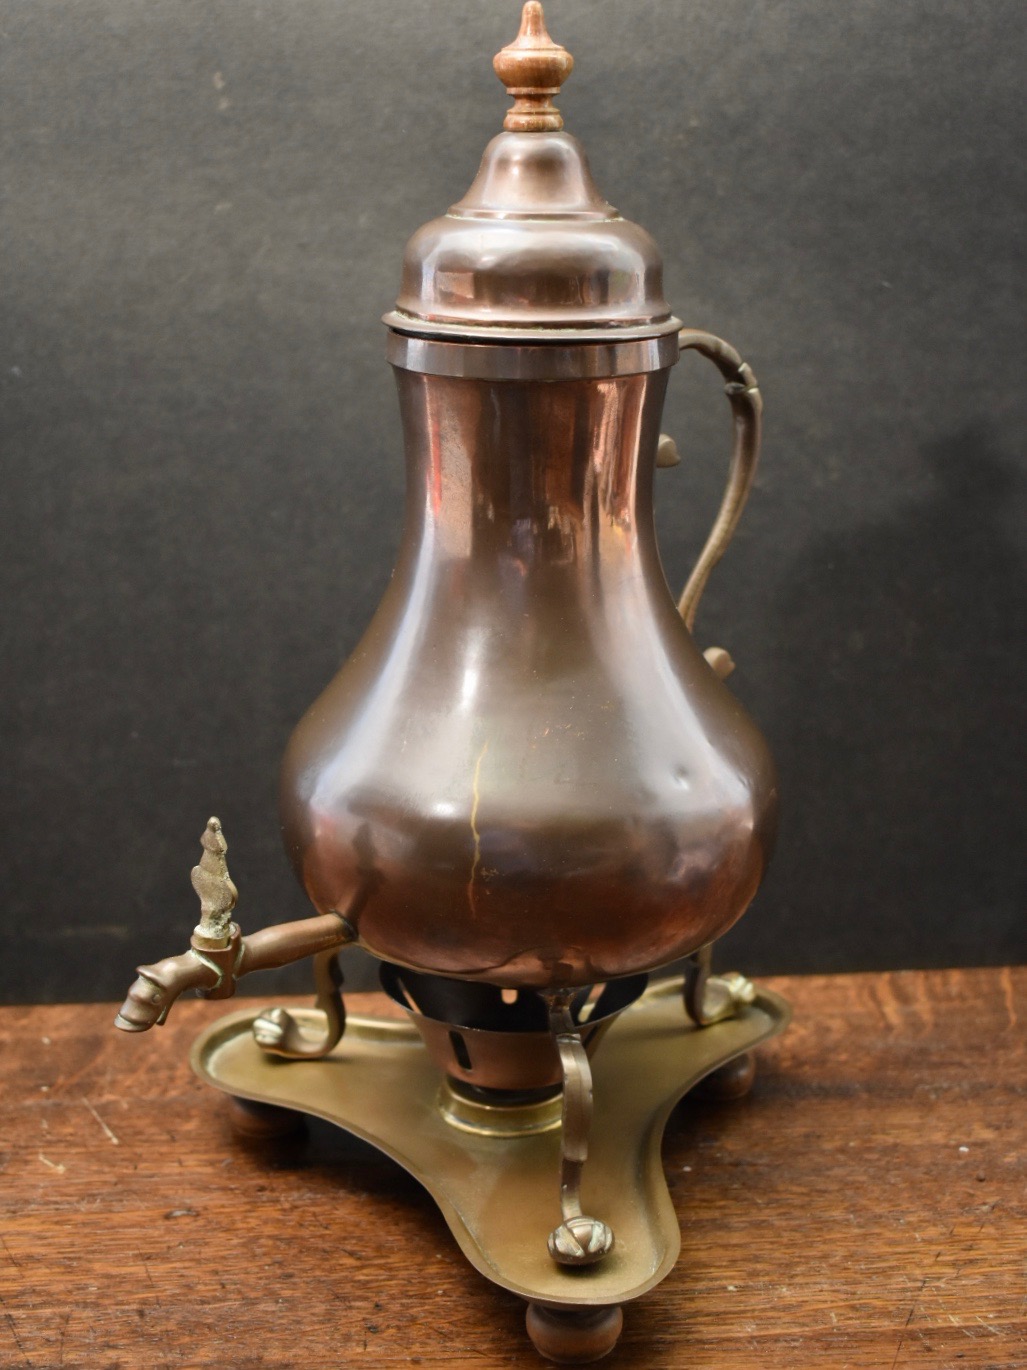 Vintage Large Copper and Brass Coffee Urn - 38 1/2 Inches Tall